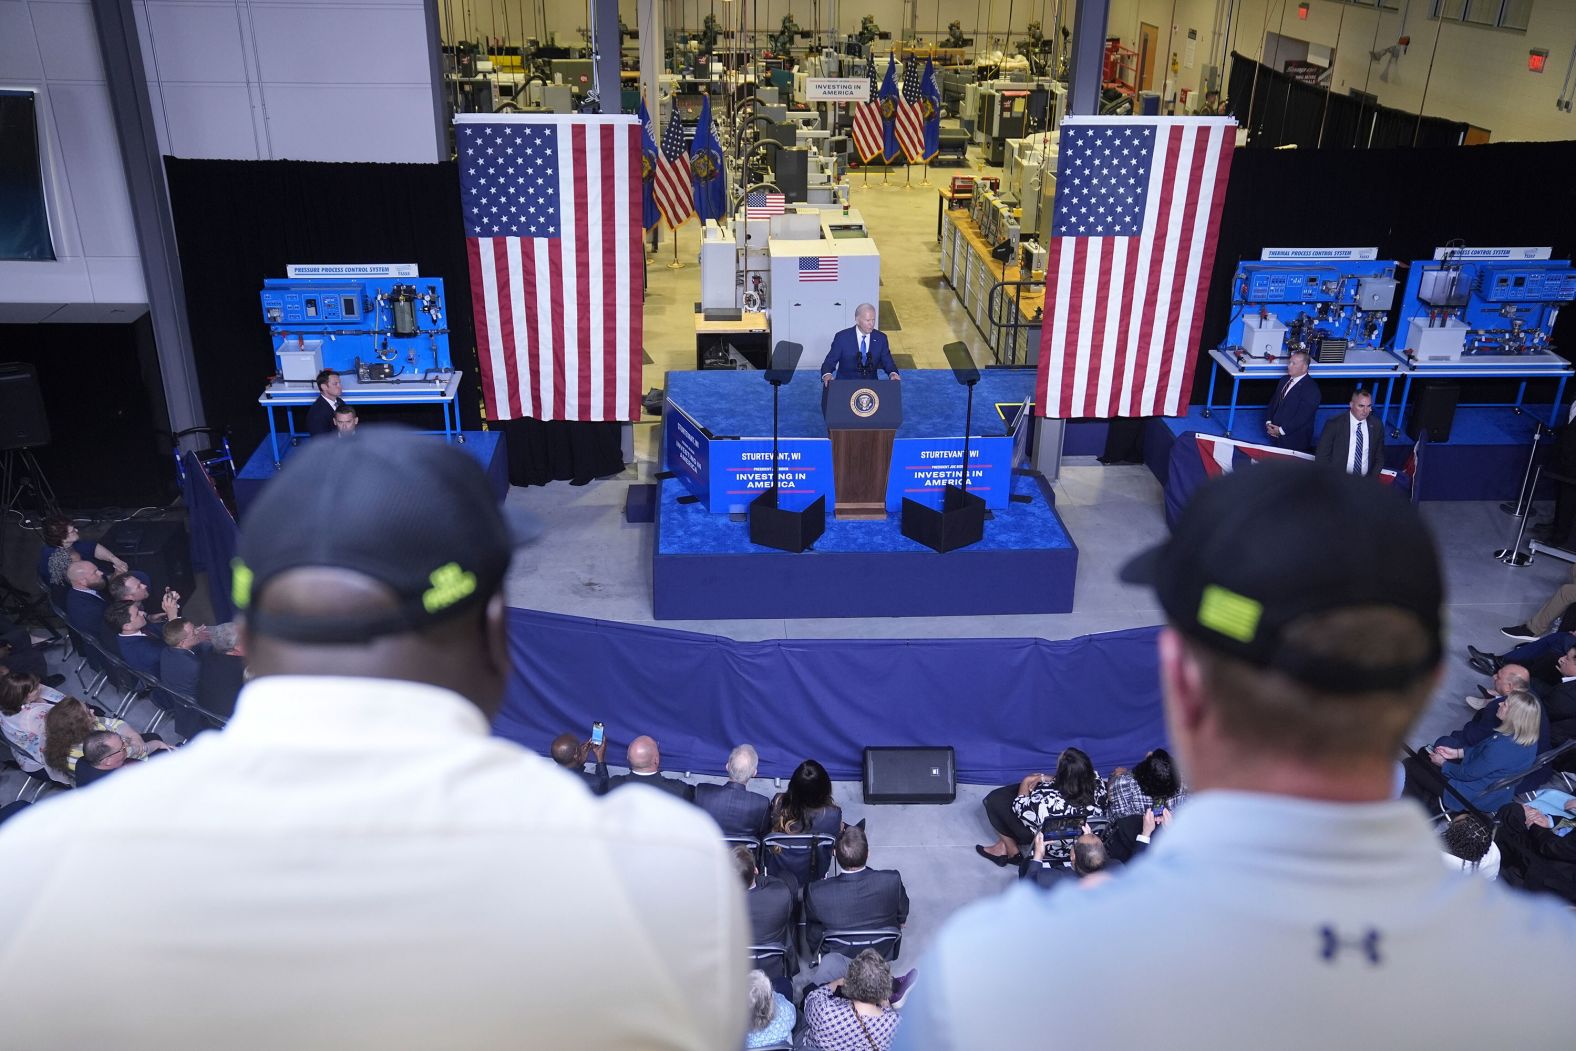 US President Joe Biden delivers remarks Wednesday, May 8, at Gateway Technical College in Sturtevant, Wisconsin. Biden announced a $3.3 billion investment from Microsoft <a href="index.php?page=&url=https%3A%2F%2Fwww.cnn.com%2F2024%2F05%2F08%2Ftech%2Fmicrosoft-ai-wisconsin%2Findex.html" target="_blank">to build a new artificial intelligence facility</a> on the same site where, in 2018, then-President Donald Trump broke ground using a golden shovel on what was supposed to be a signature project under his administration: an electronics factory for Taiwan's Foxconn, which had secured billions in tax credits and promised thousands of jobs.